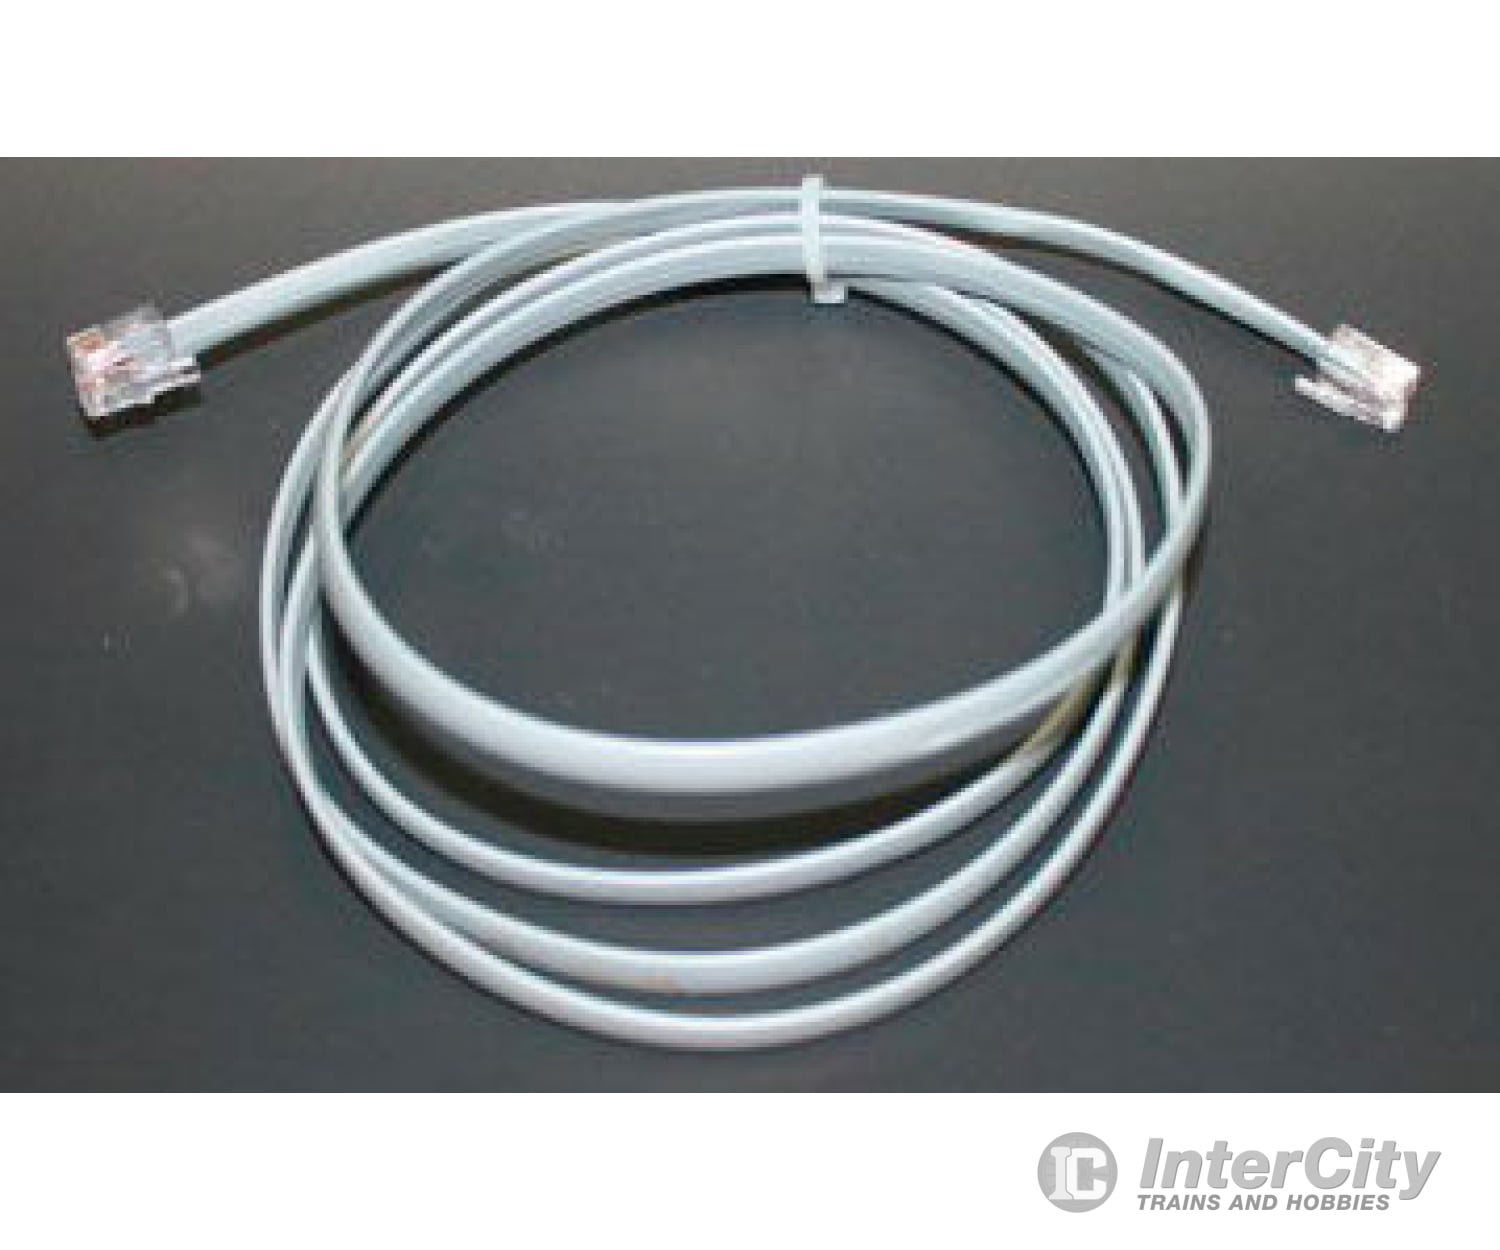 Accu Lites A 2015 Loconet/Nce Cable - - 15’ 4.6M Dcc Accessories